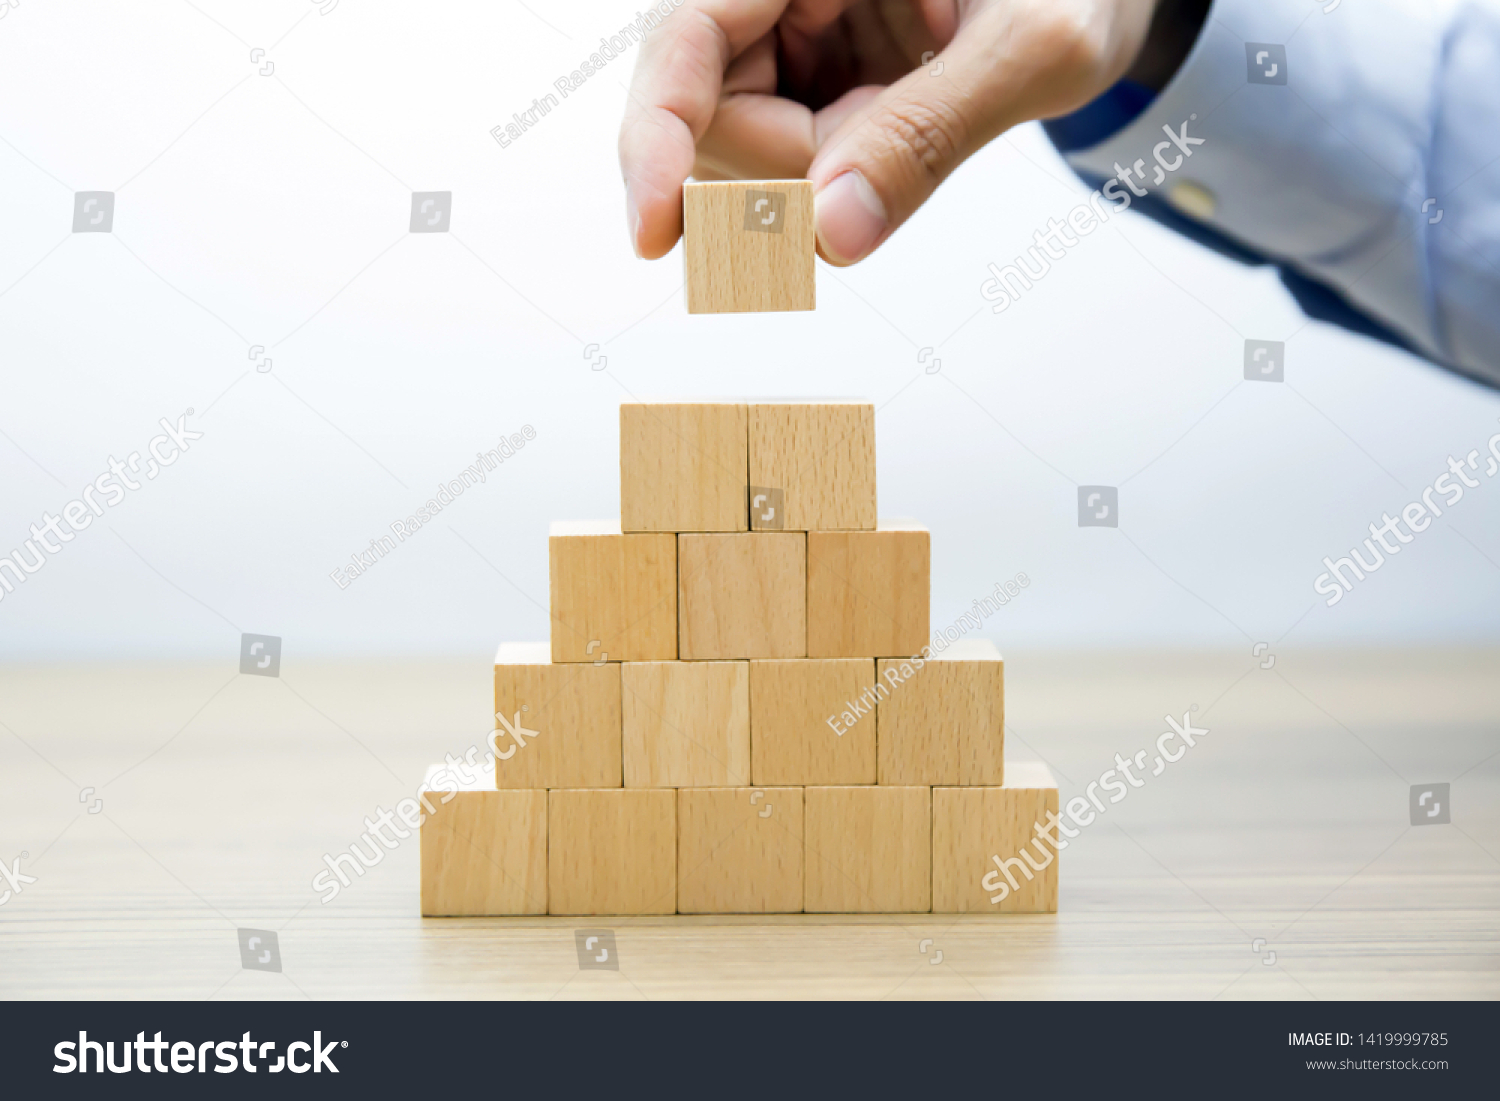 Middle 
Fifteen Wooden cube Stacked in 
Pyramid shape  without graphics for Business and design concept, Symbol of leadership, Teamwork and Growth. #1419999785